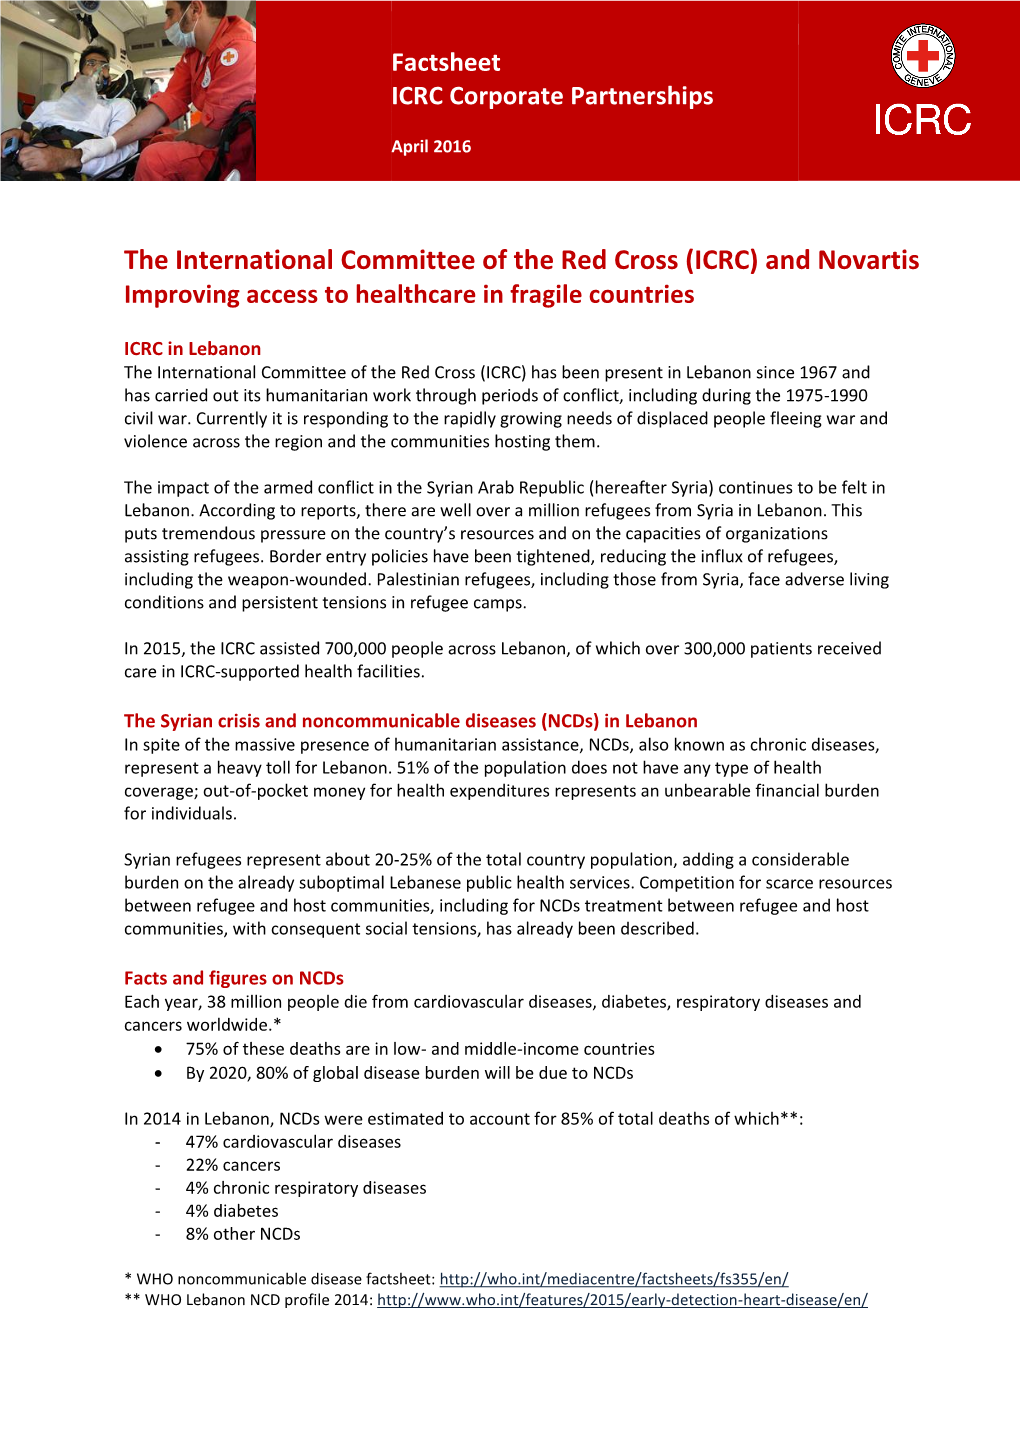 The International Committee of the Red Cross (ICRC) and Novartis Improving Access to Healthcare in Fragile Countries